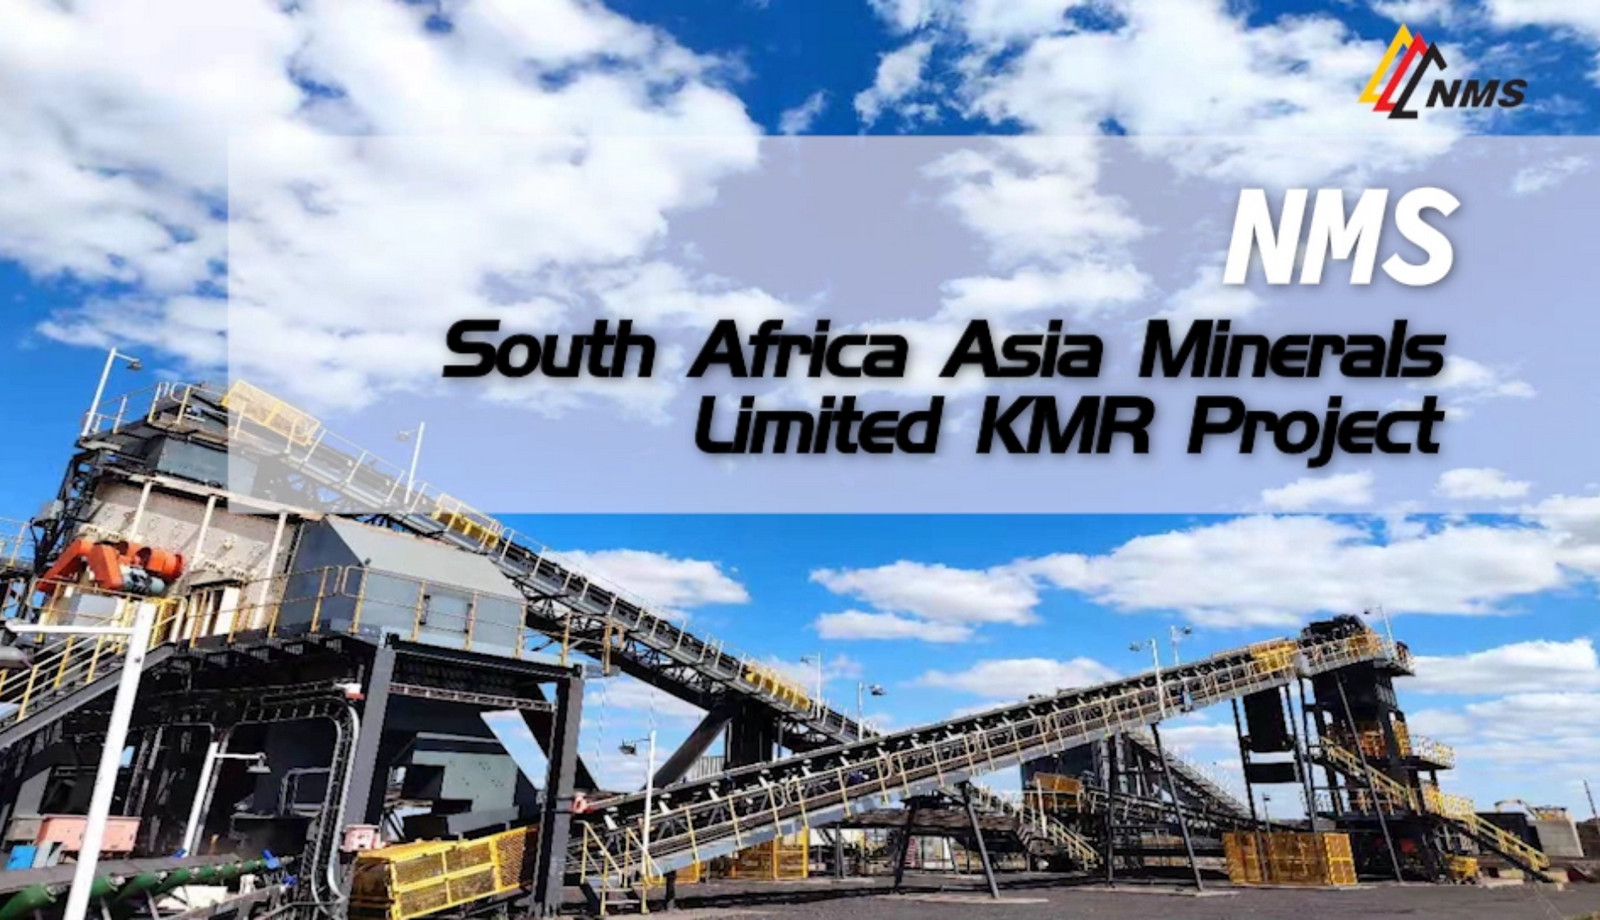 NMS South Africa Asia Minerals Limited KMR Project